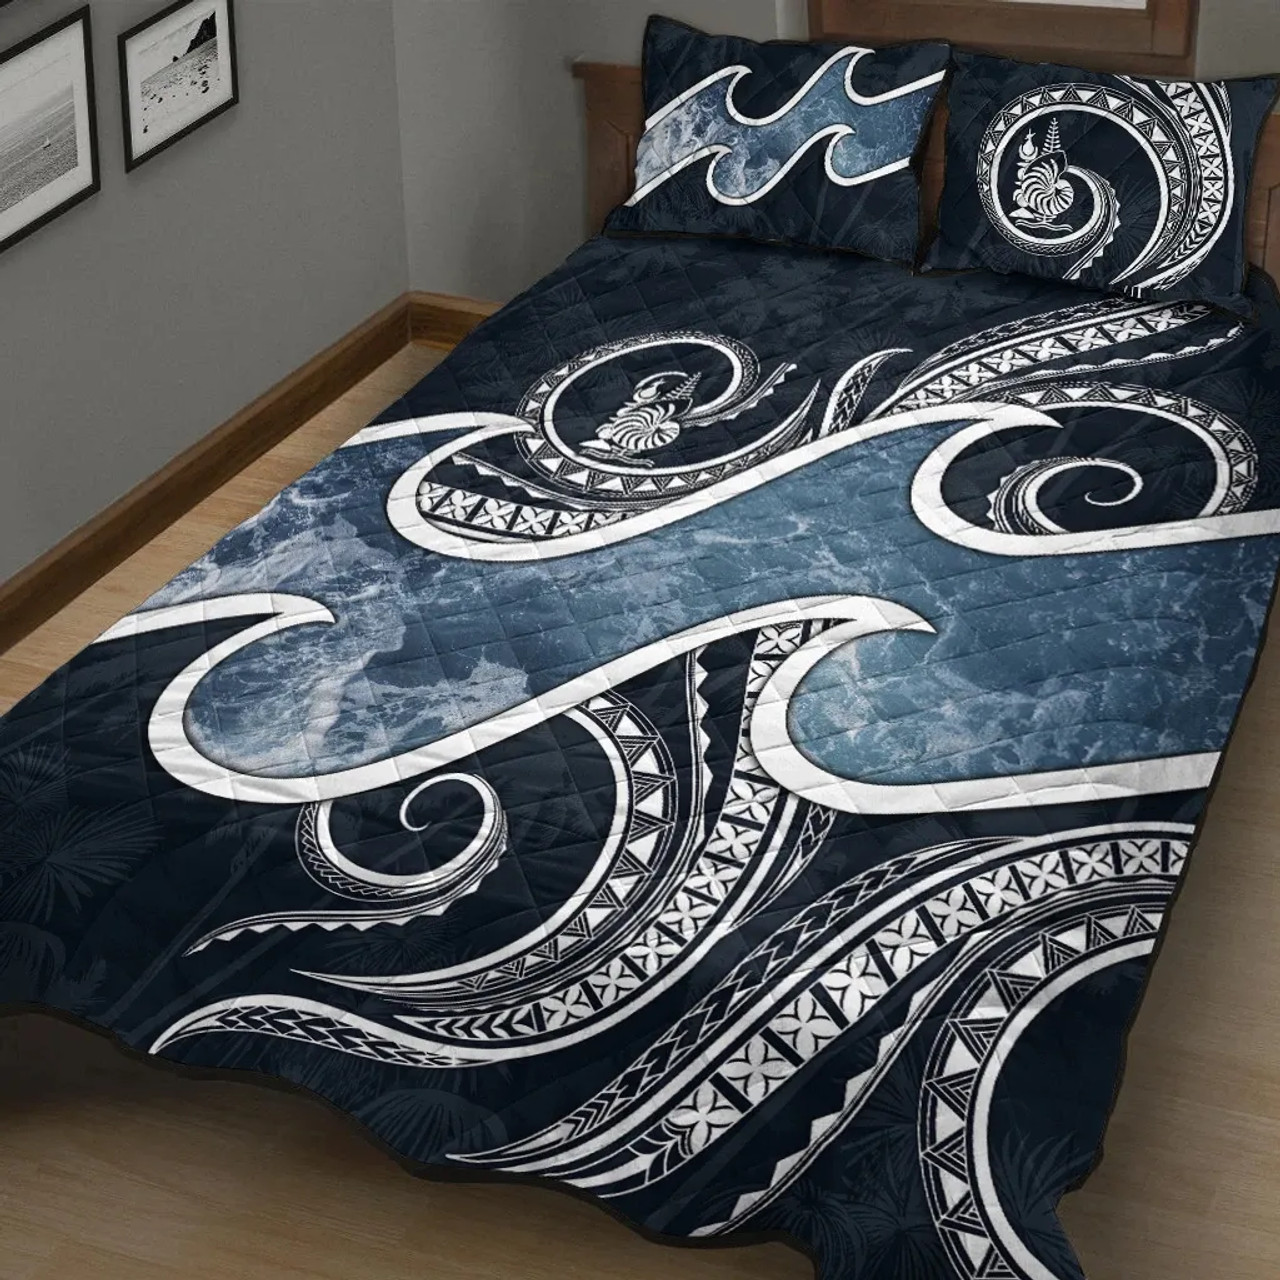 New Caledonia Polynesian Quilt Bed Set - Ocean Style 3